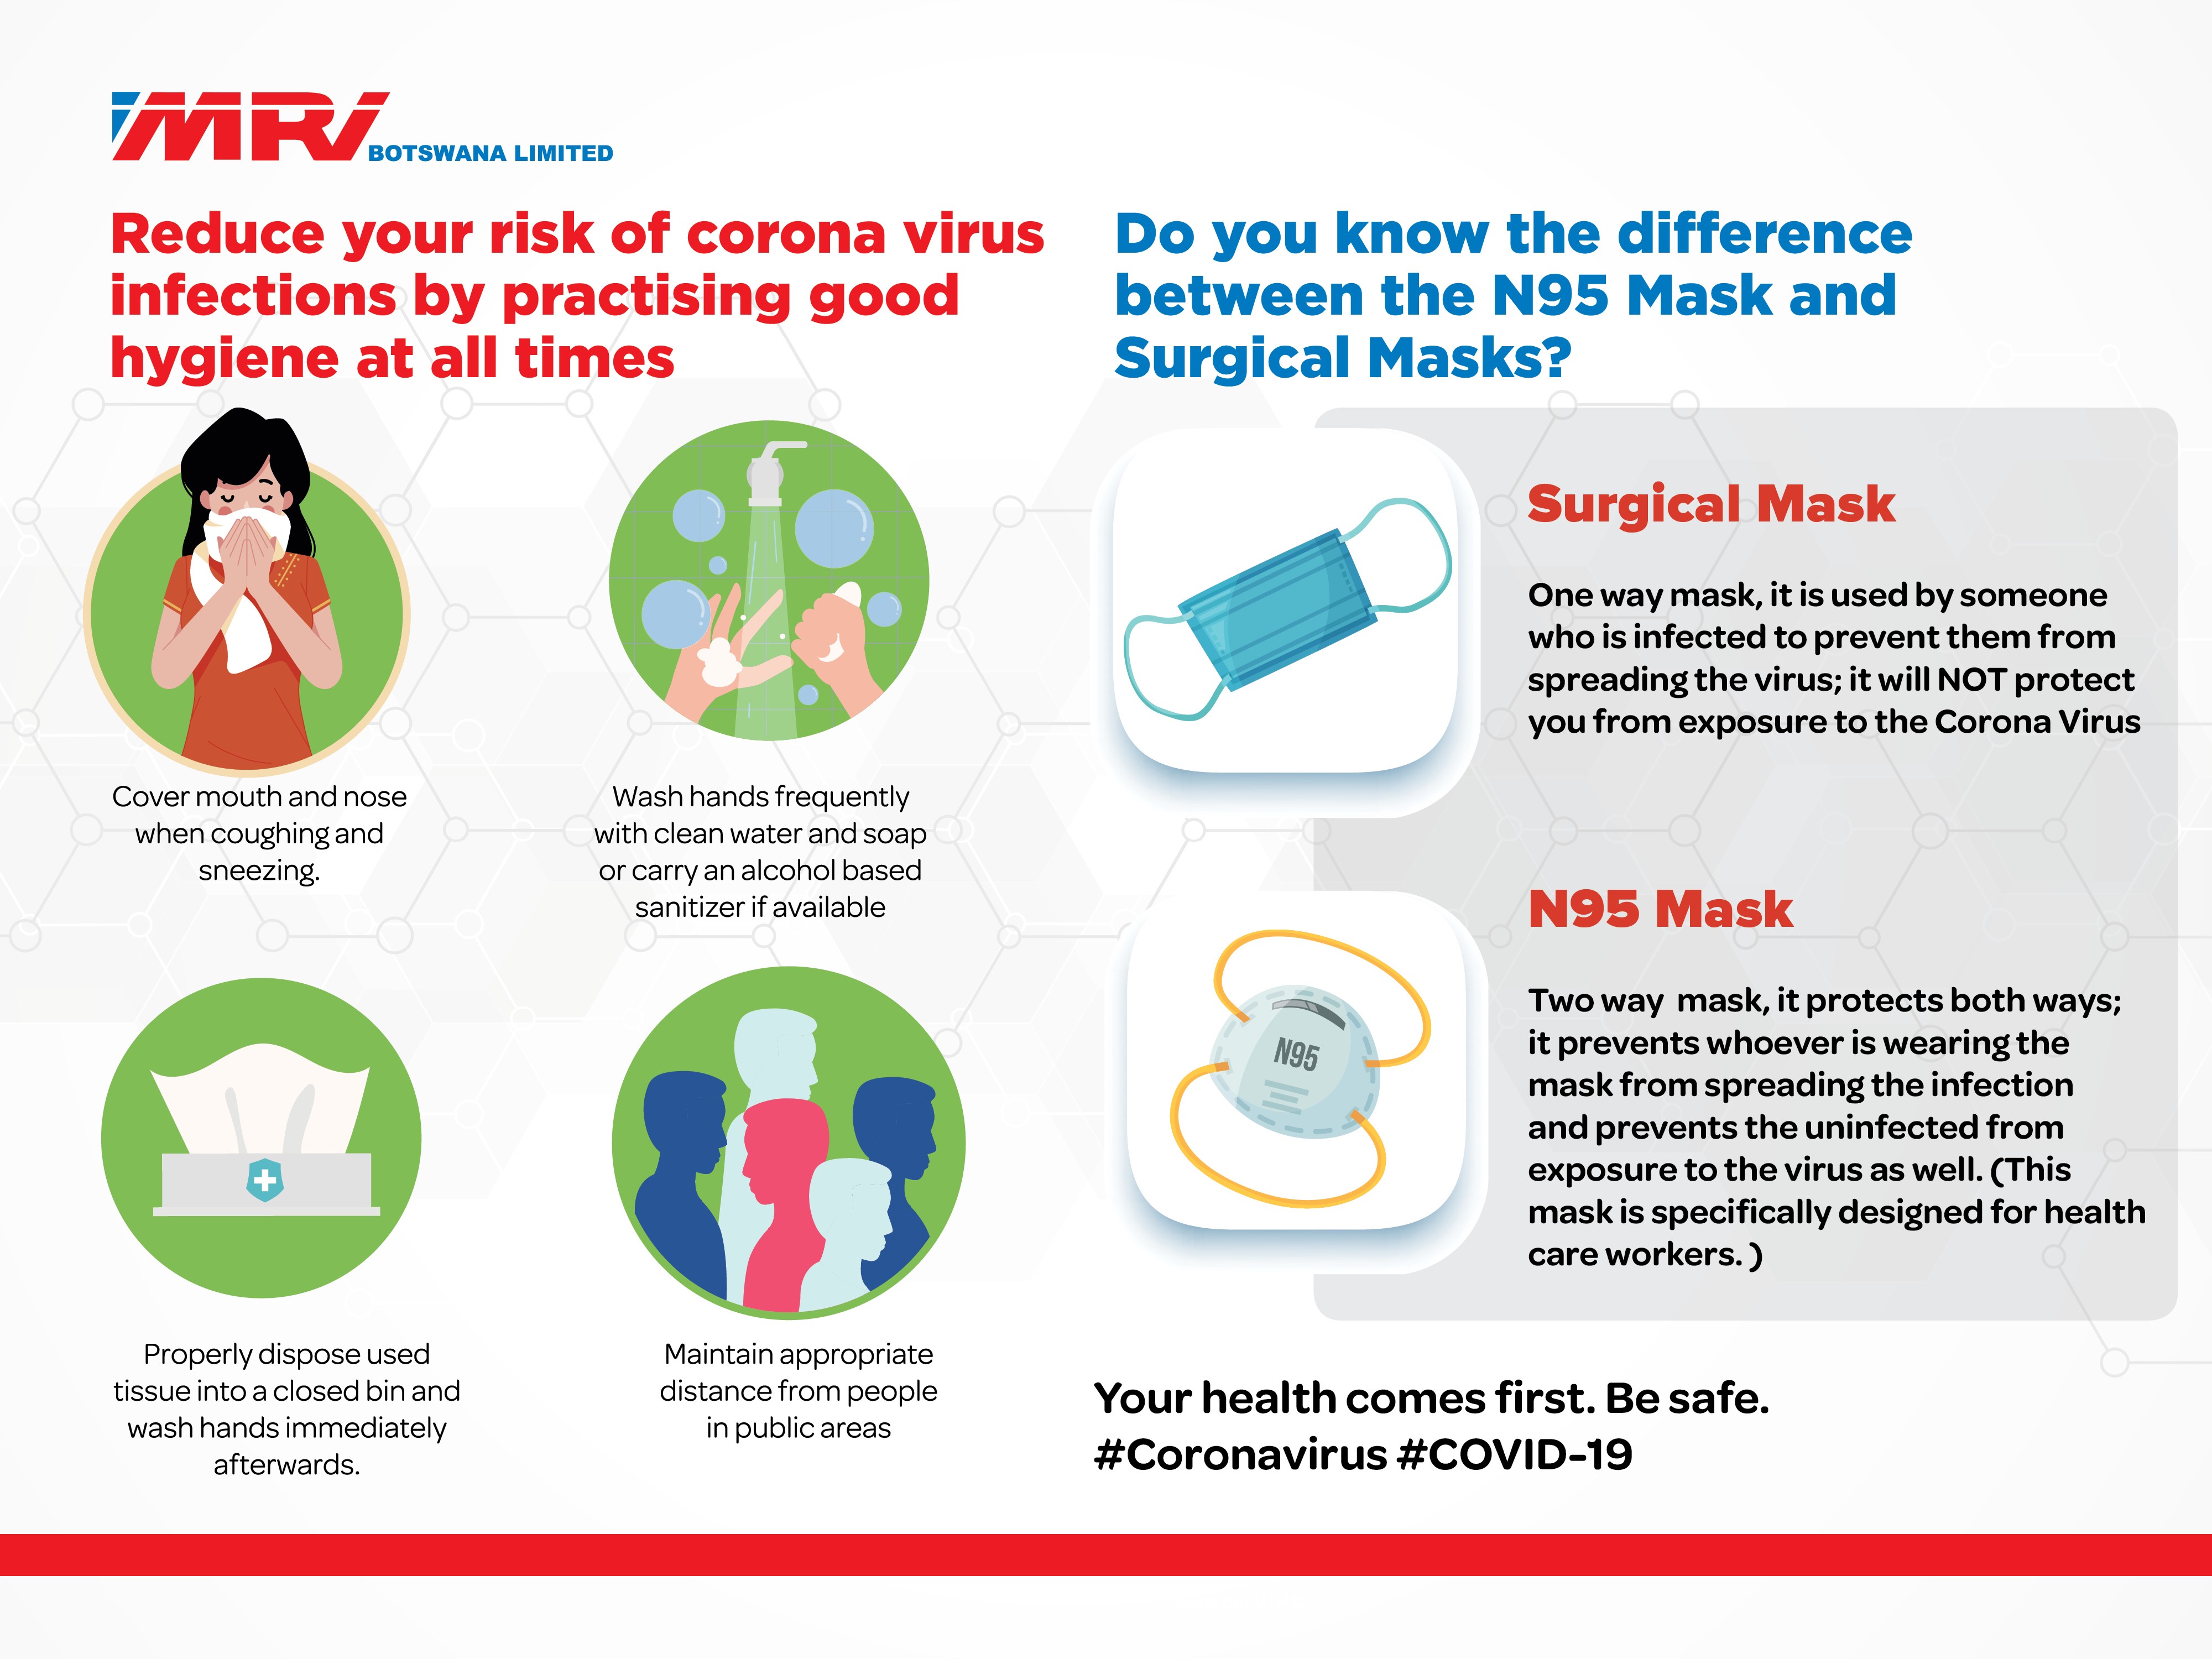 Reduce your risk of coronavirus infection by practising good hygiene 